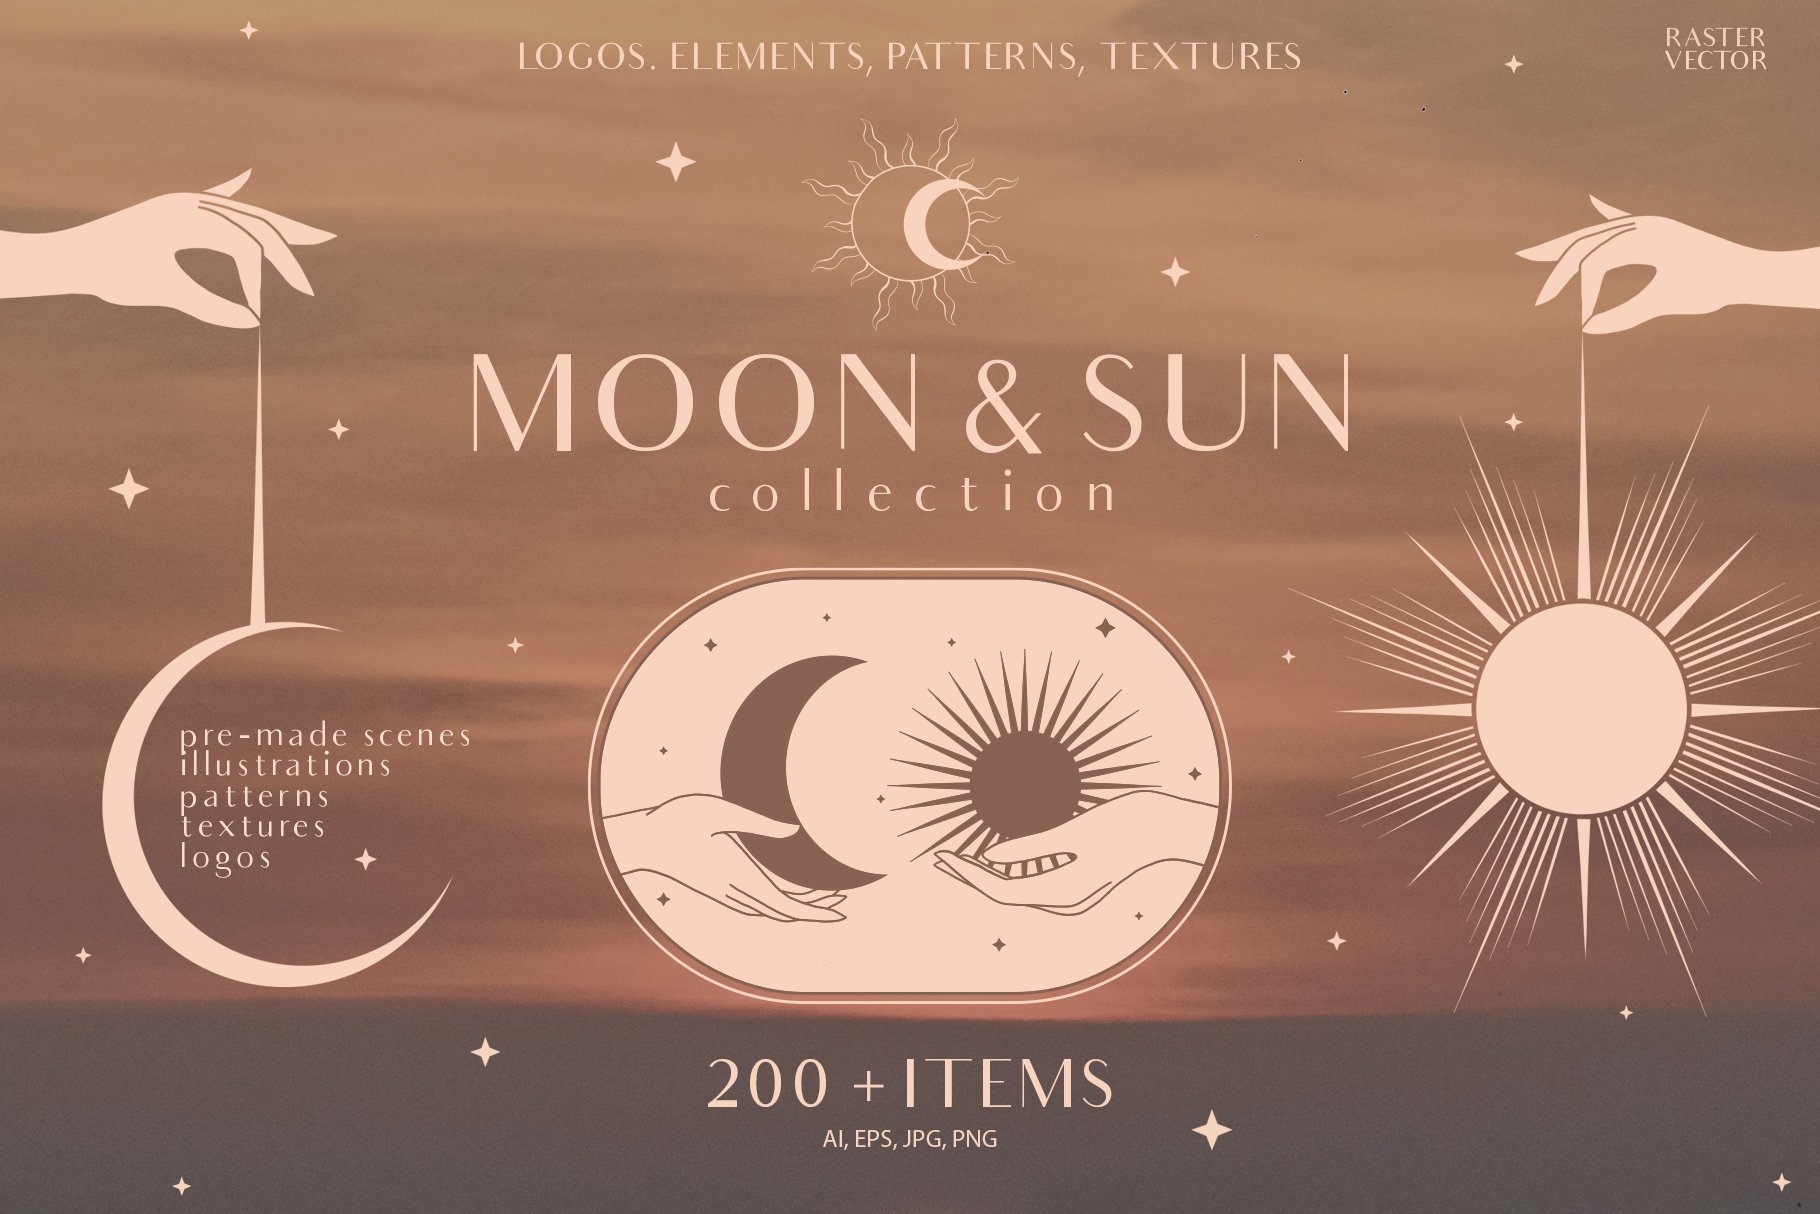 Moon and sun collection cover image.